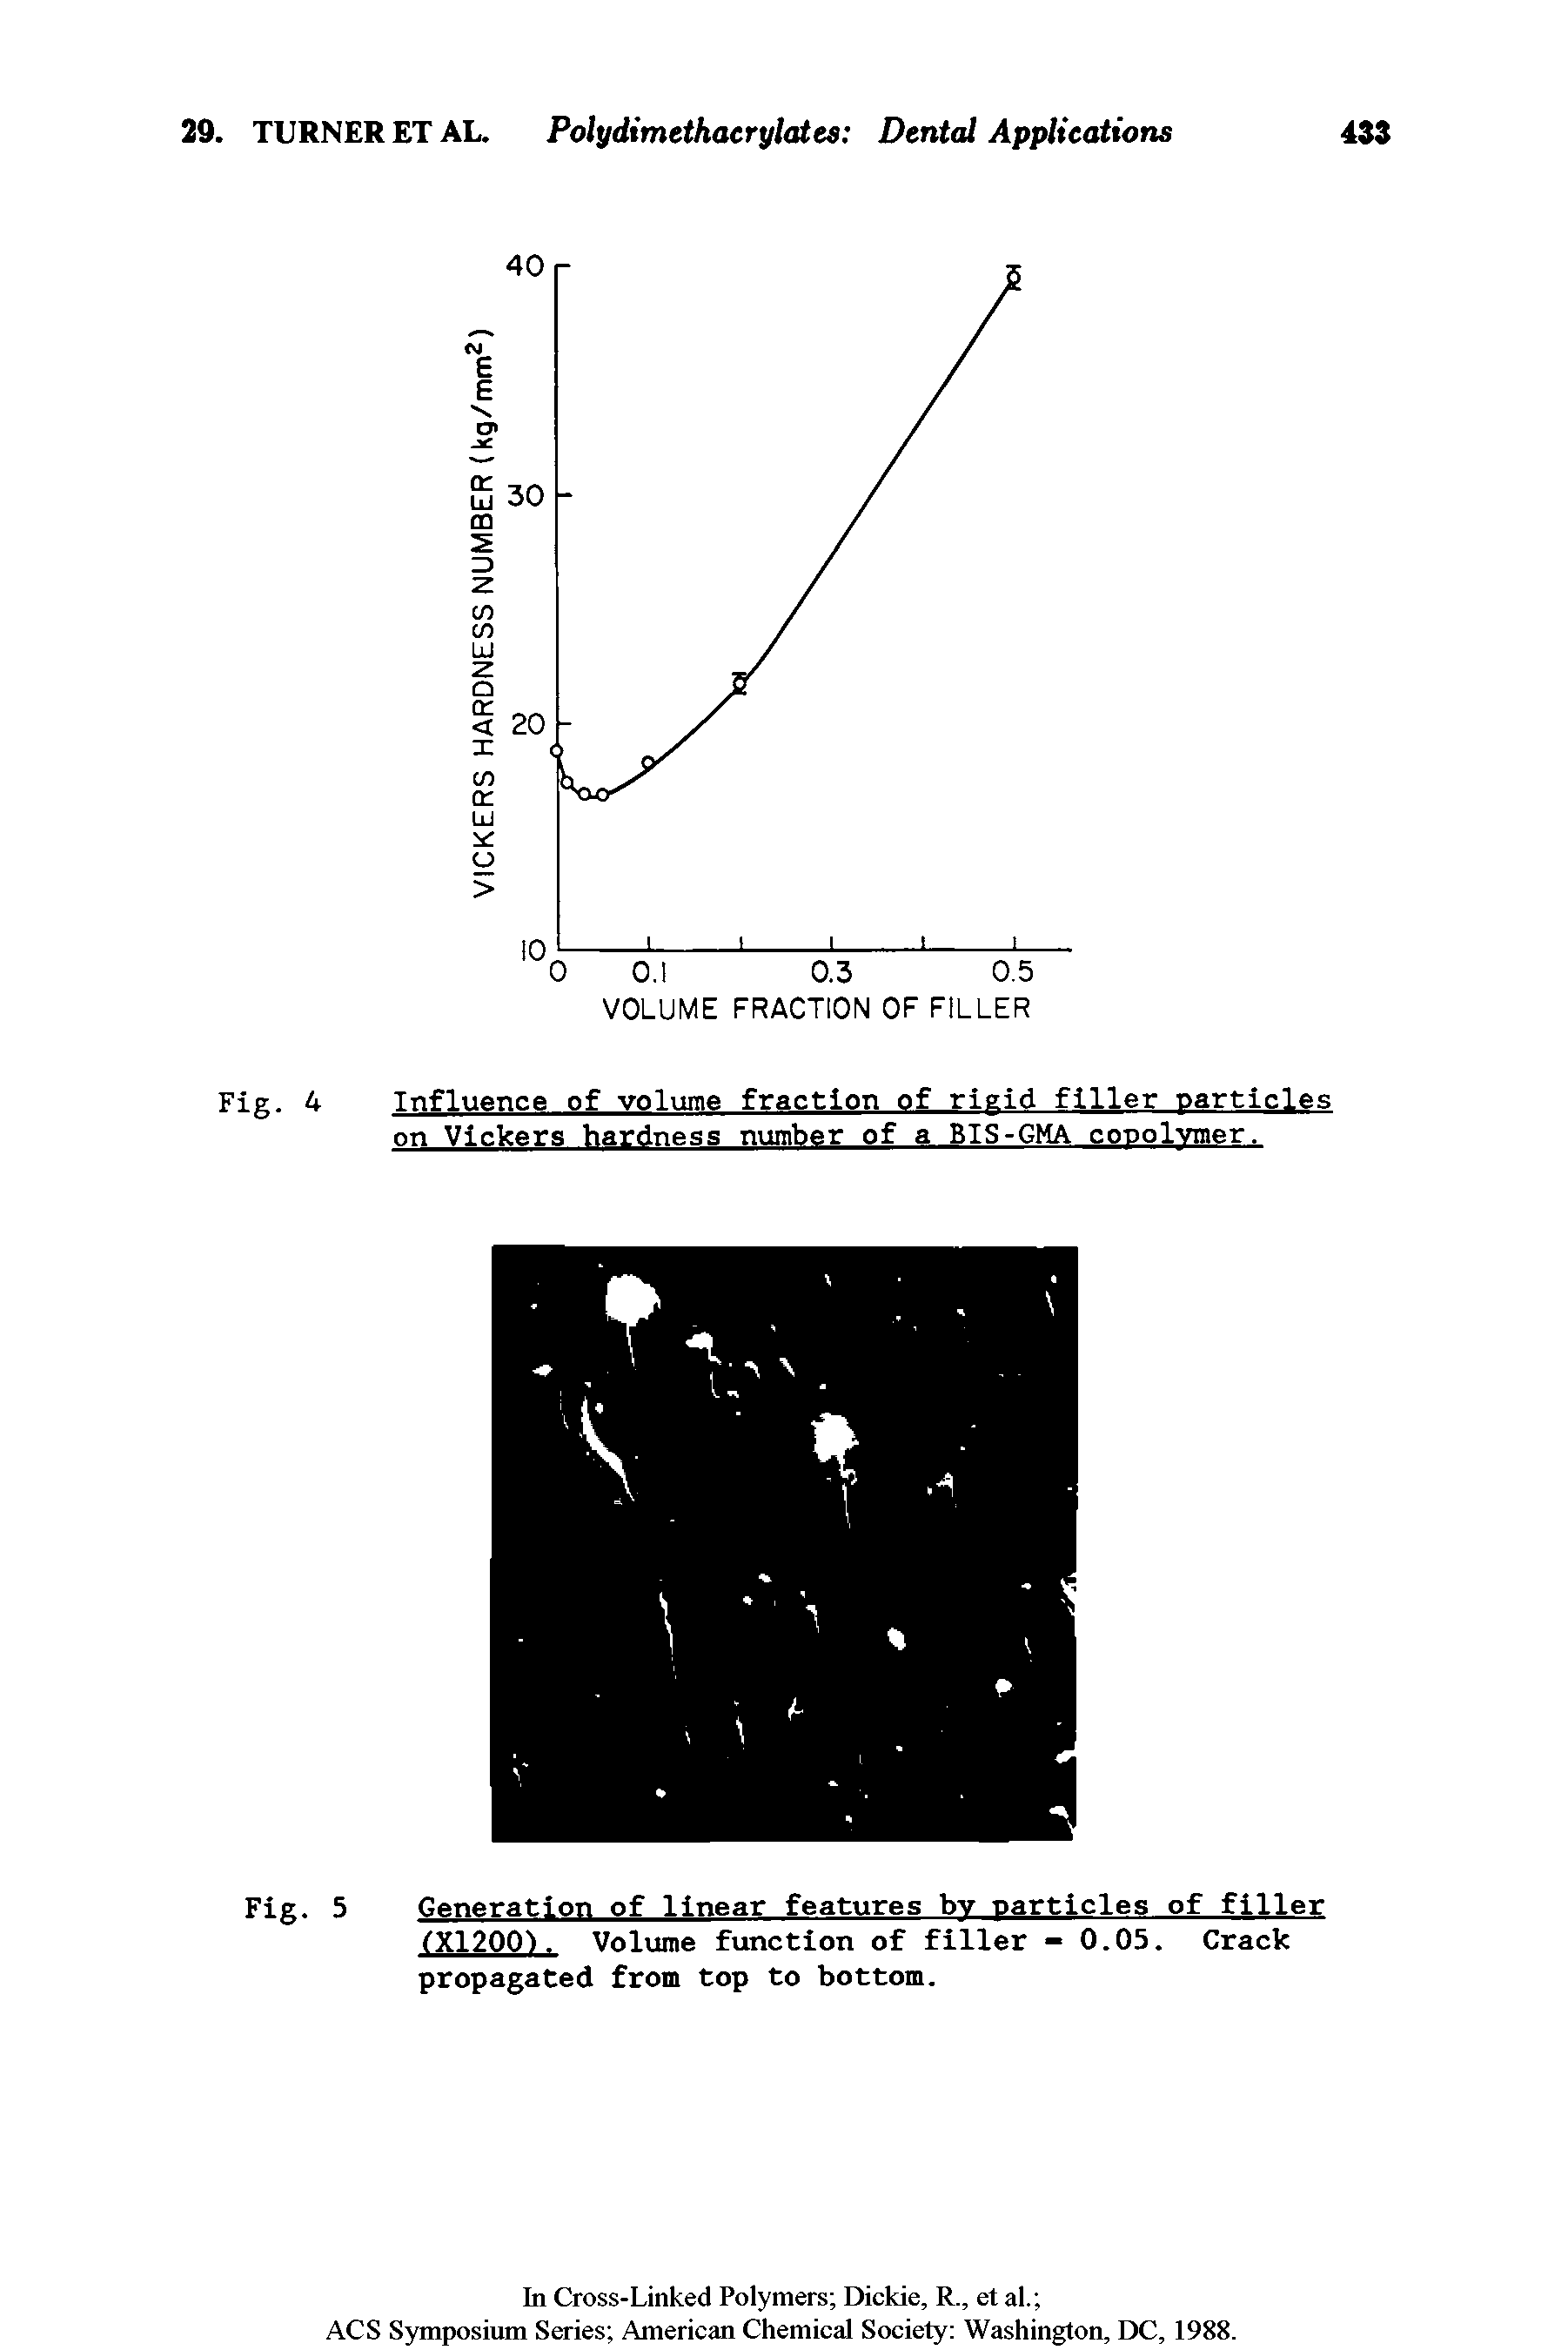 Fig. 5 Generation of linear features bv particles of filler (XlZOOl. Volume function of filler - 0.05. Crack propagated from top to bottom.